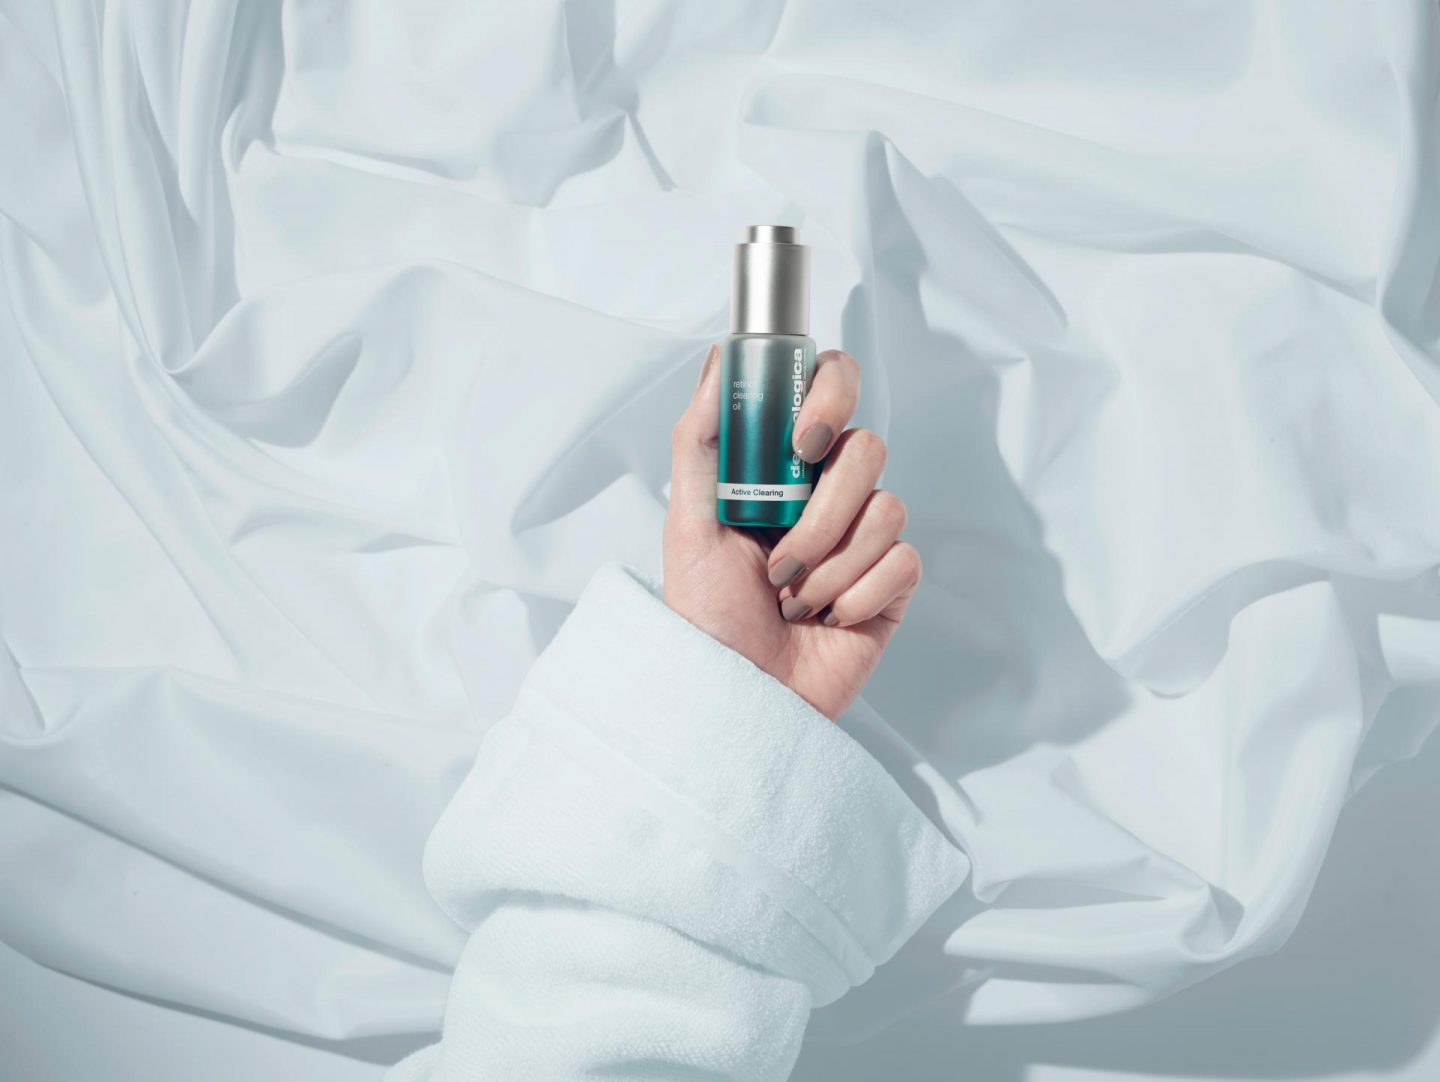 Introducing the NEW Dermalogica Active Clearing Retinol Oil